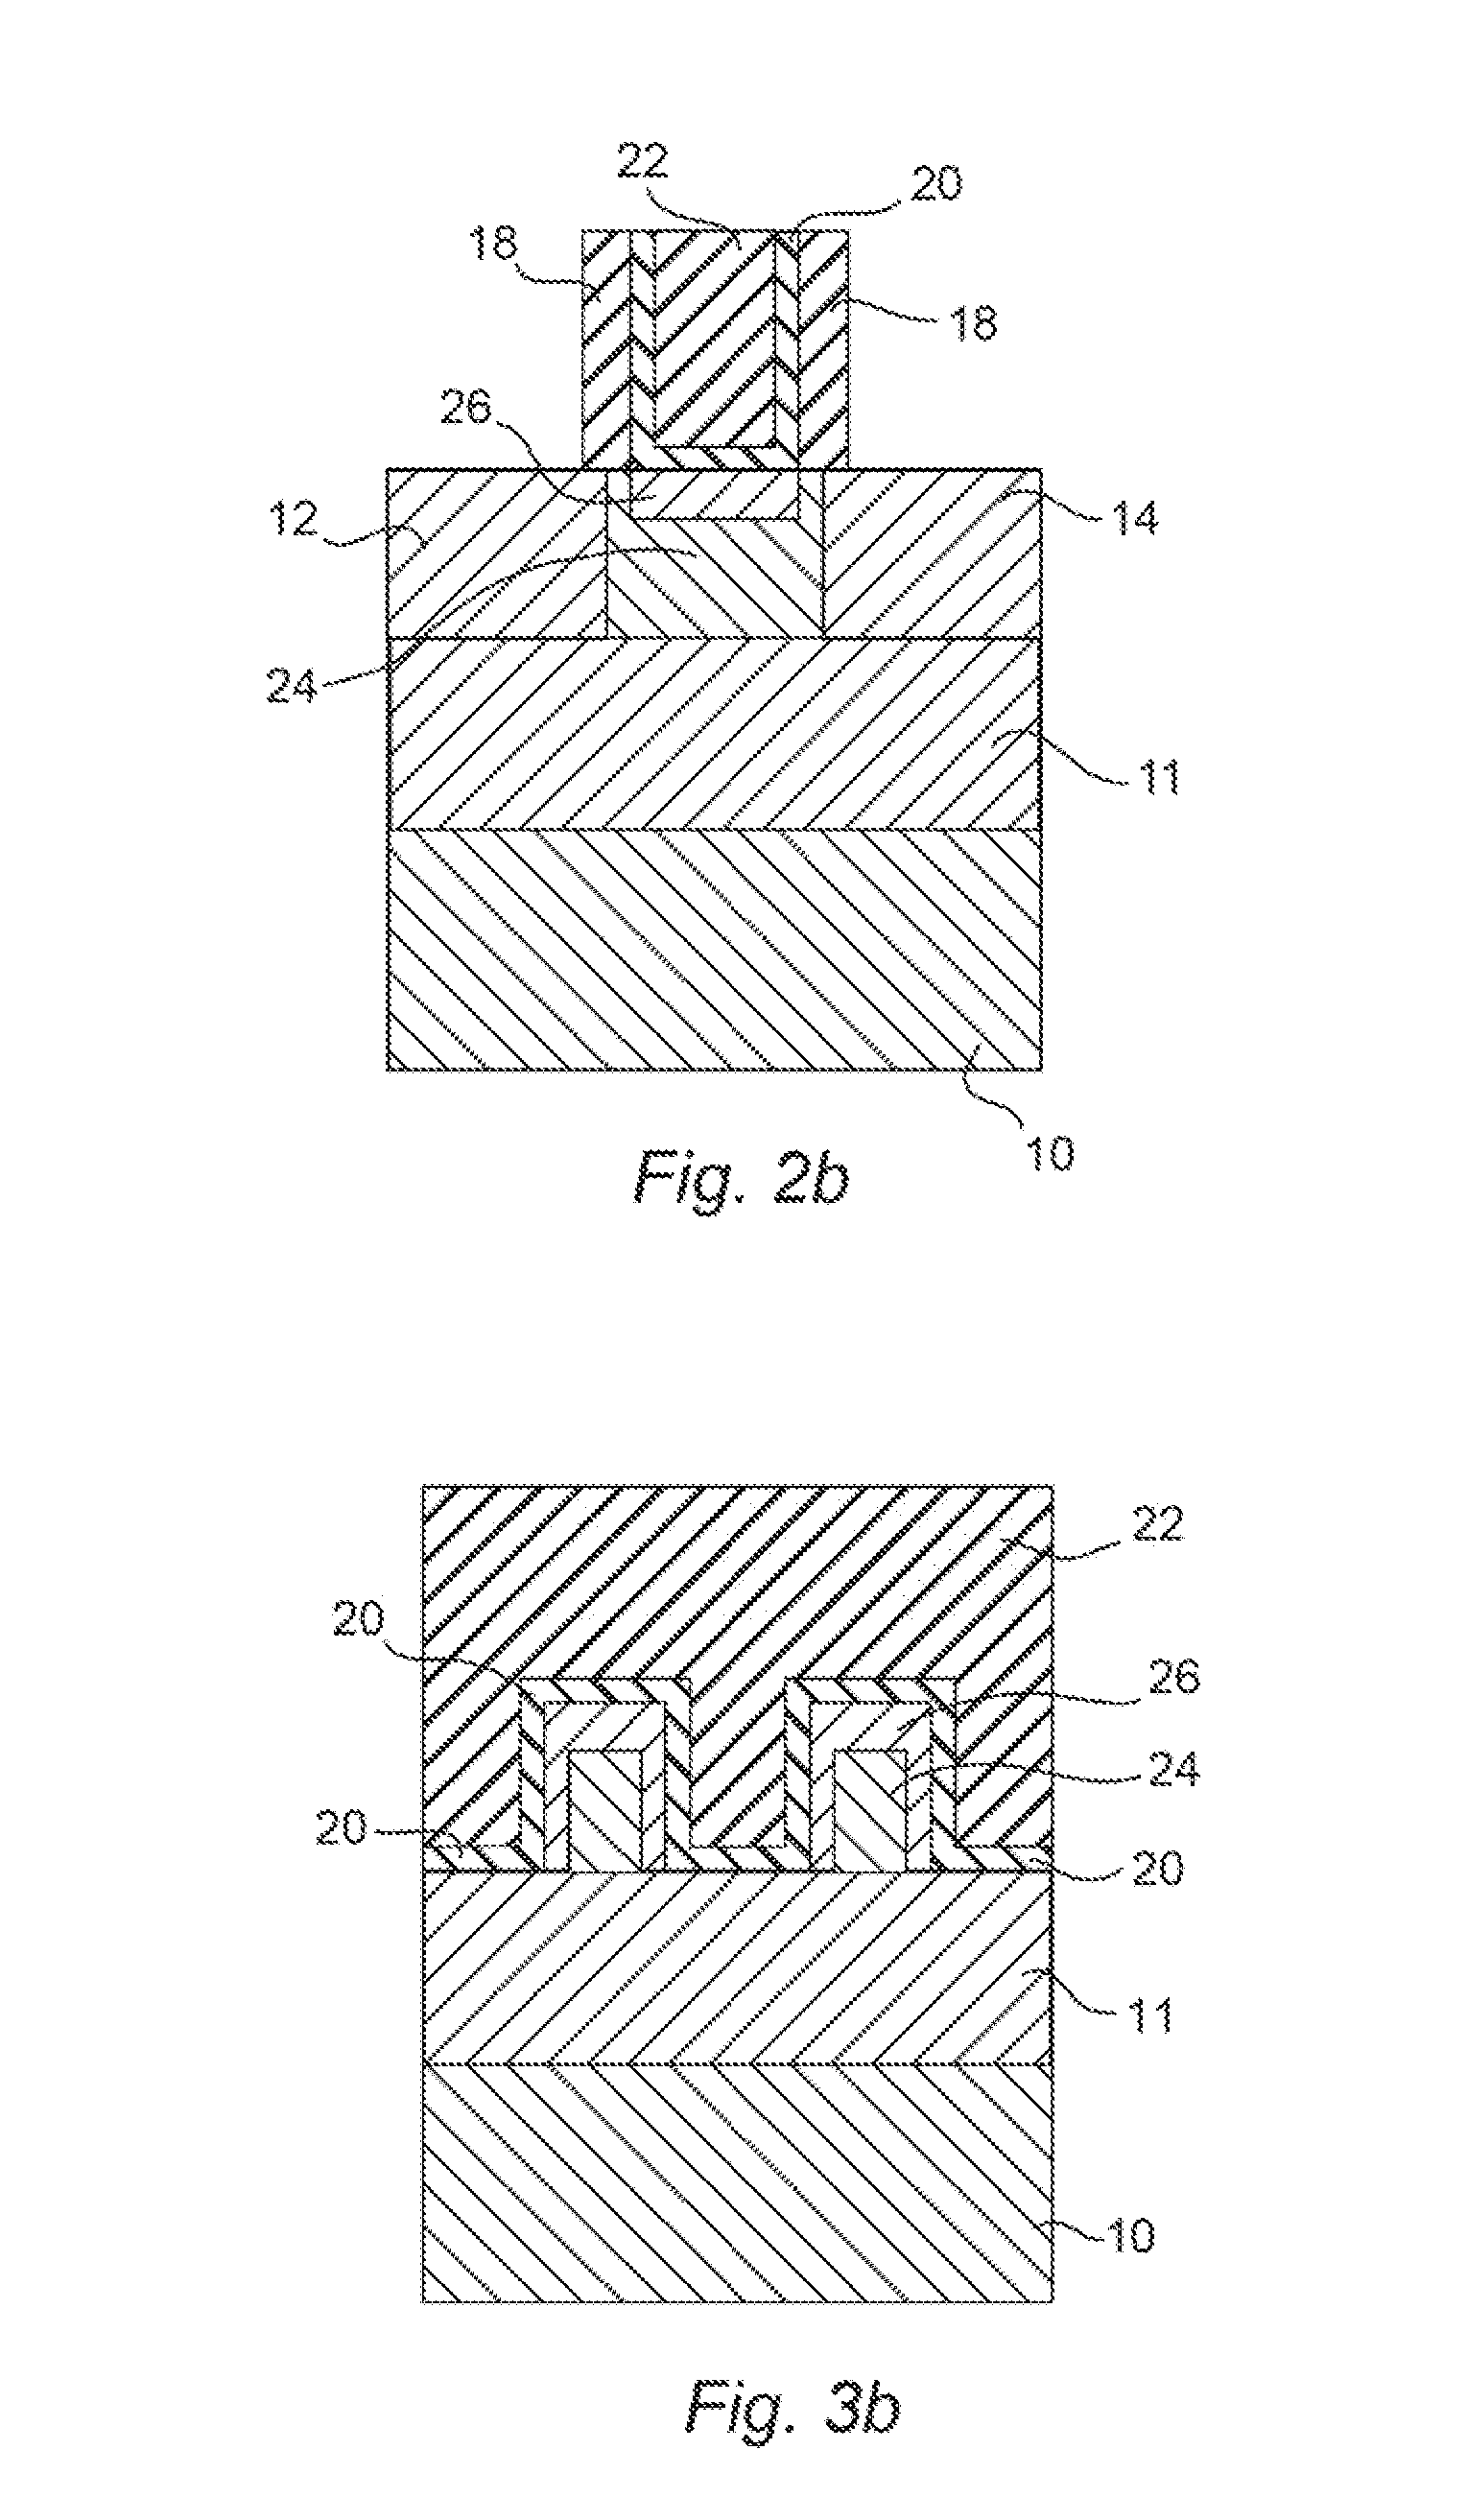 Semiconductor device having compressively strained channel region and method of making same